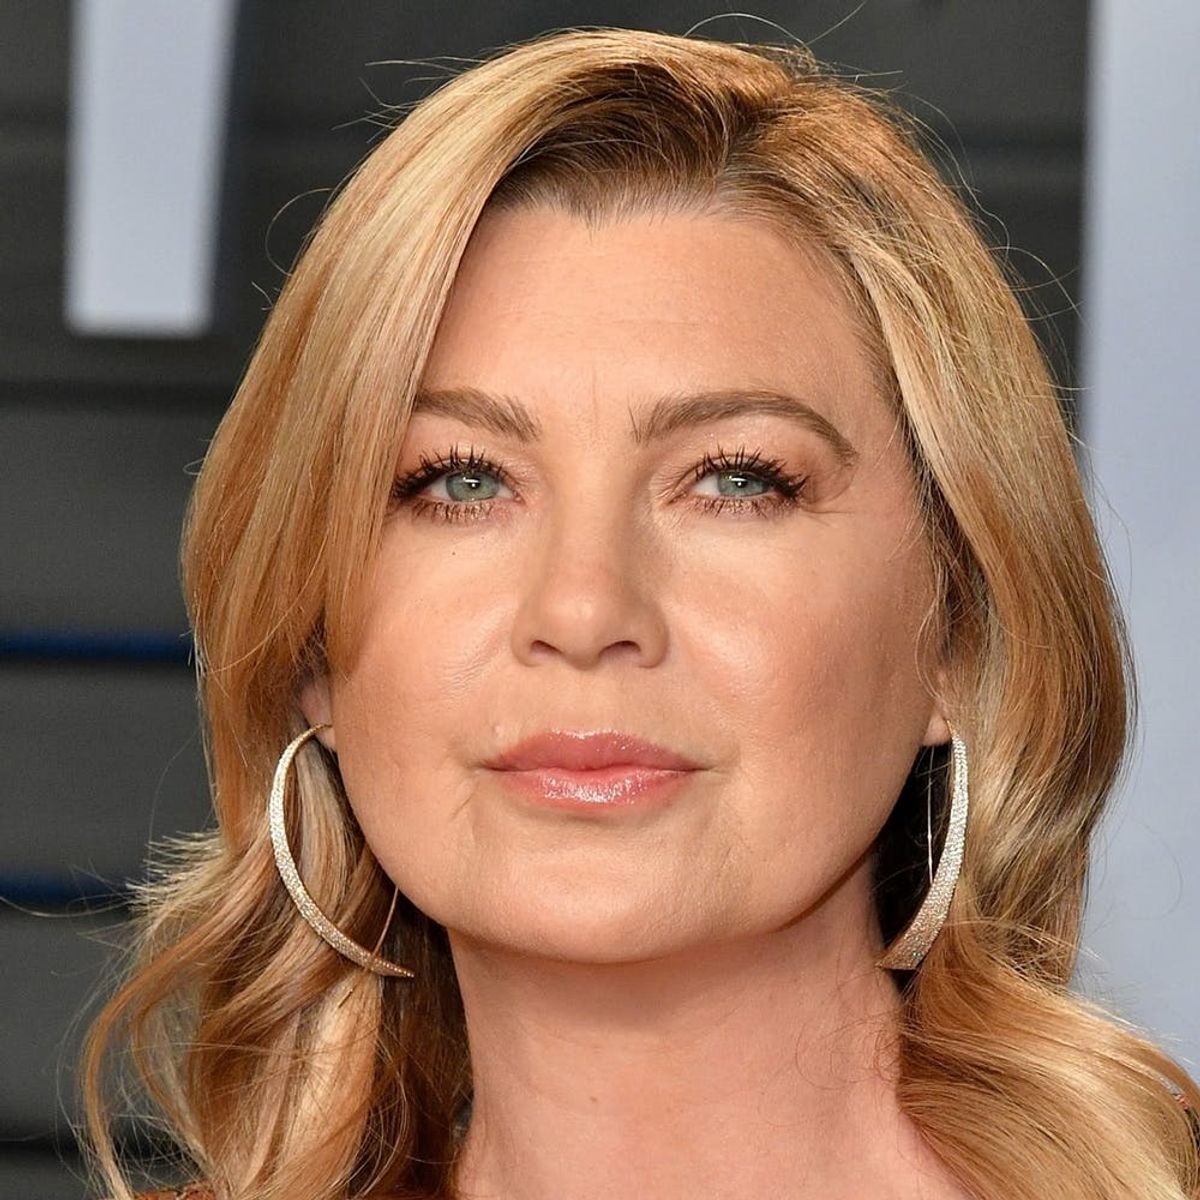 Ellen Pompeo Reveals She Was Robbed While Vacationing in Italy With Her 2 Daughters